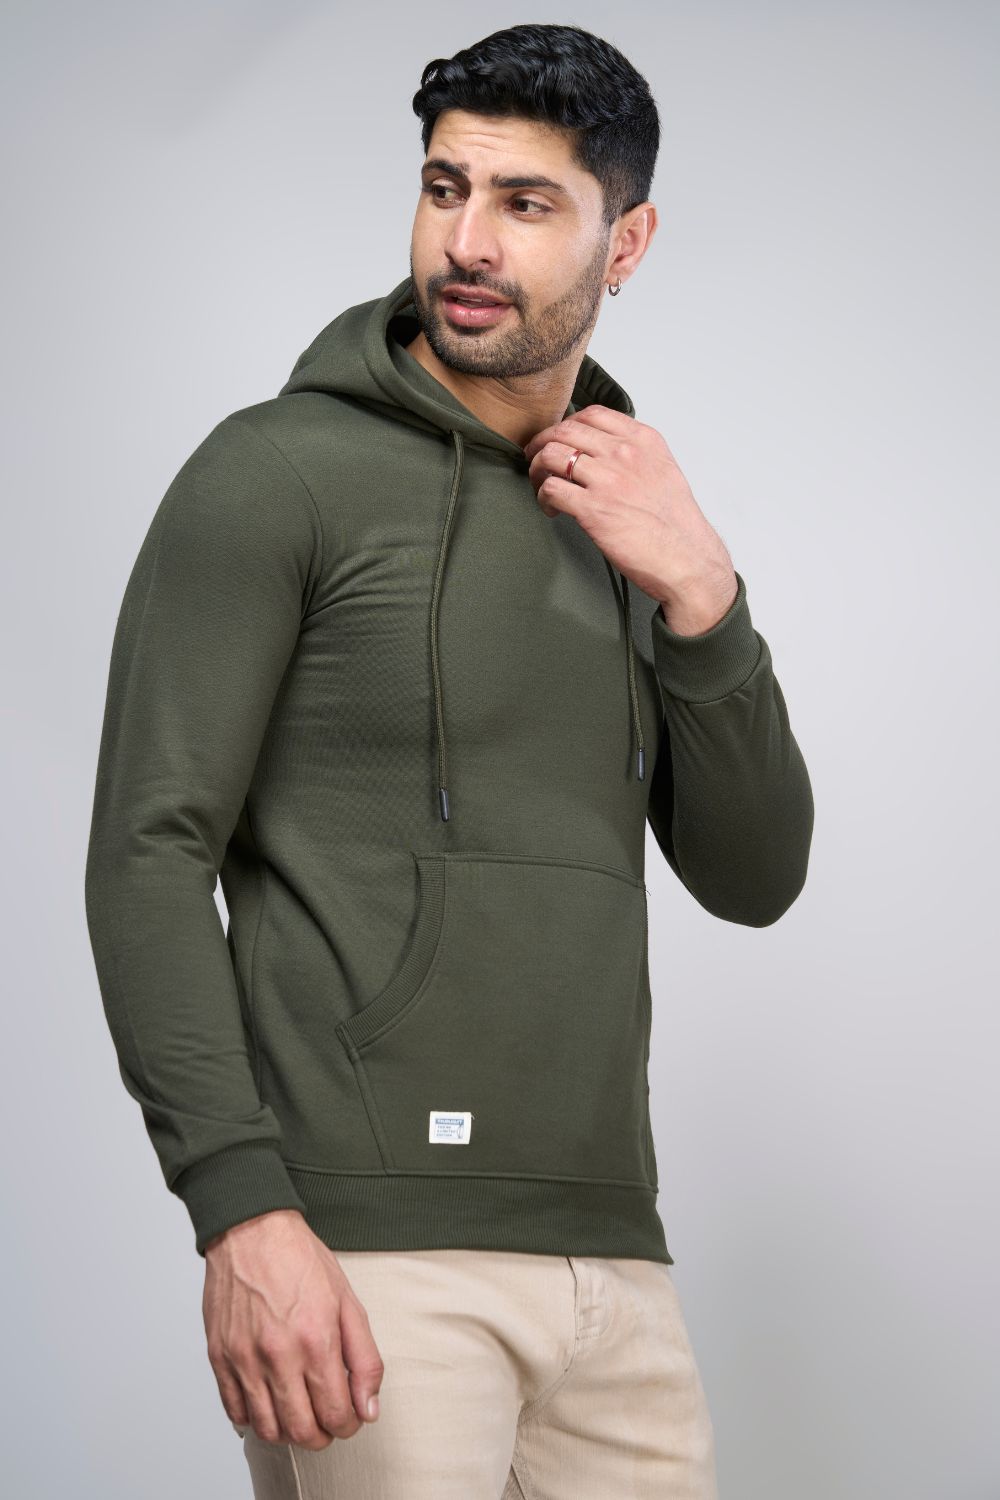 Olive colored, hoodie for men with full sleeves and relaxed fit, pocket view.